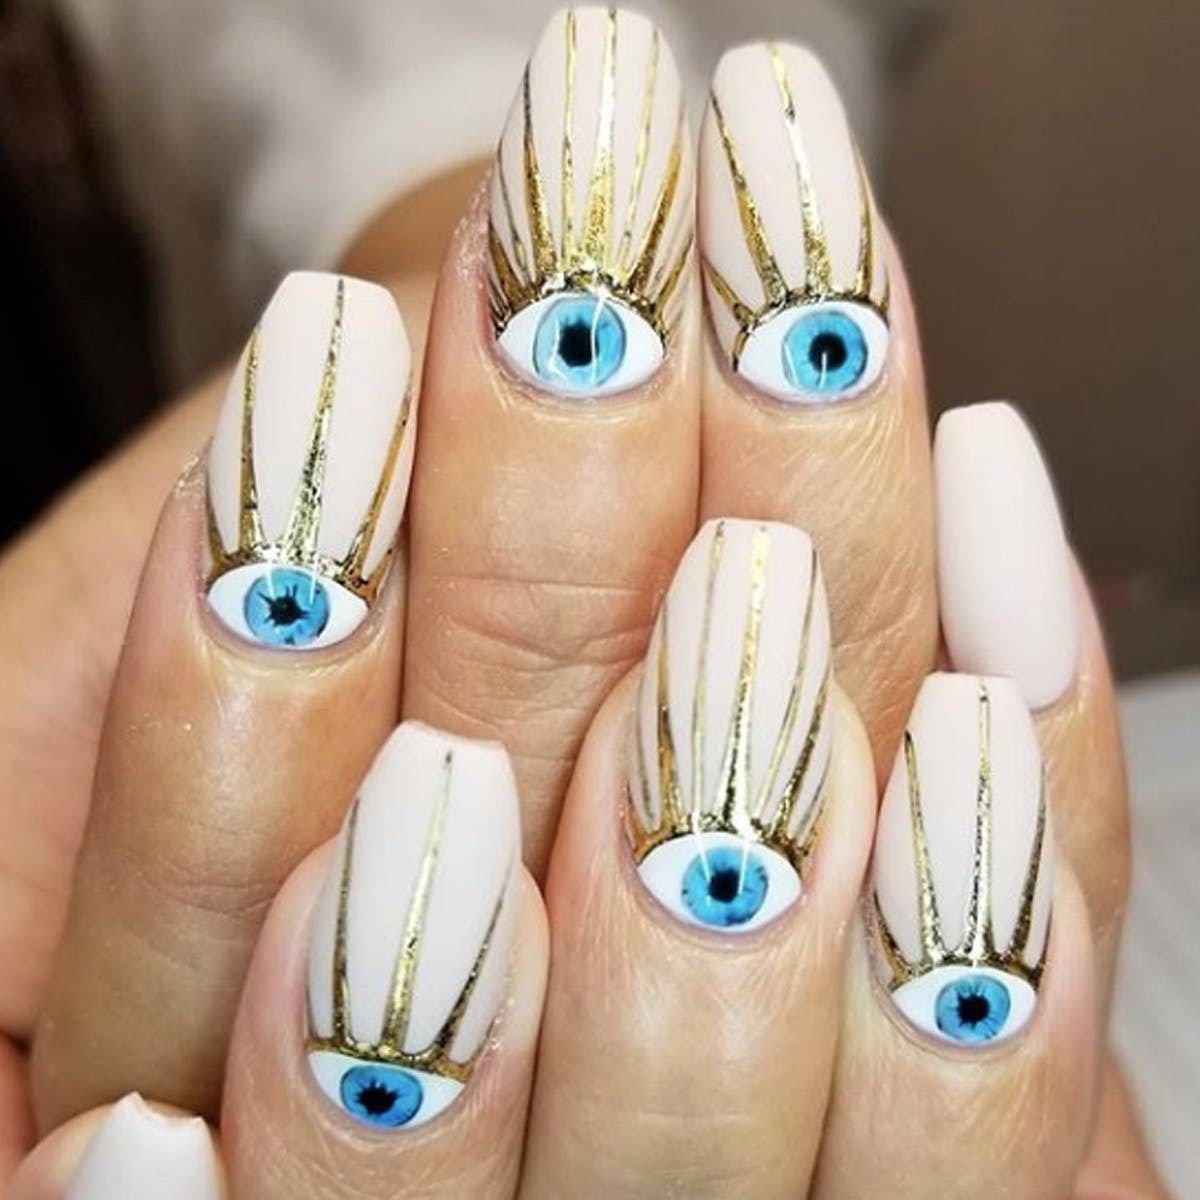 15 Evil Eye Manicures to Ward Off Bad Vibes